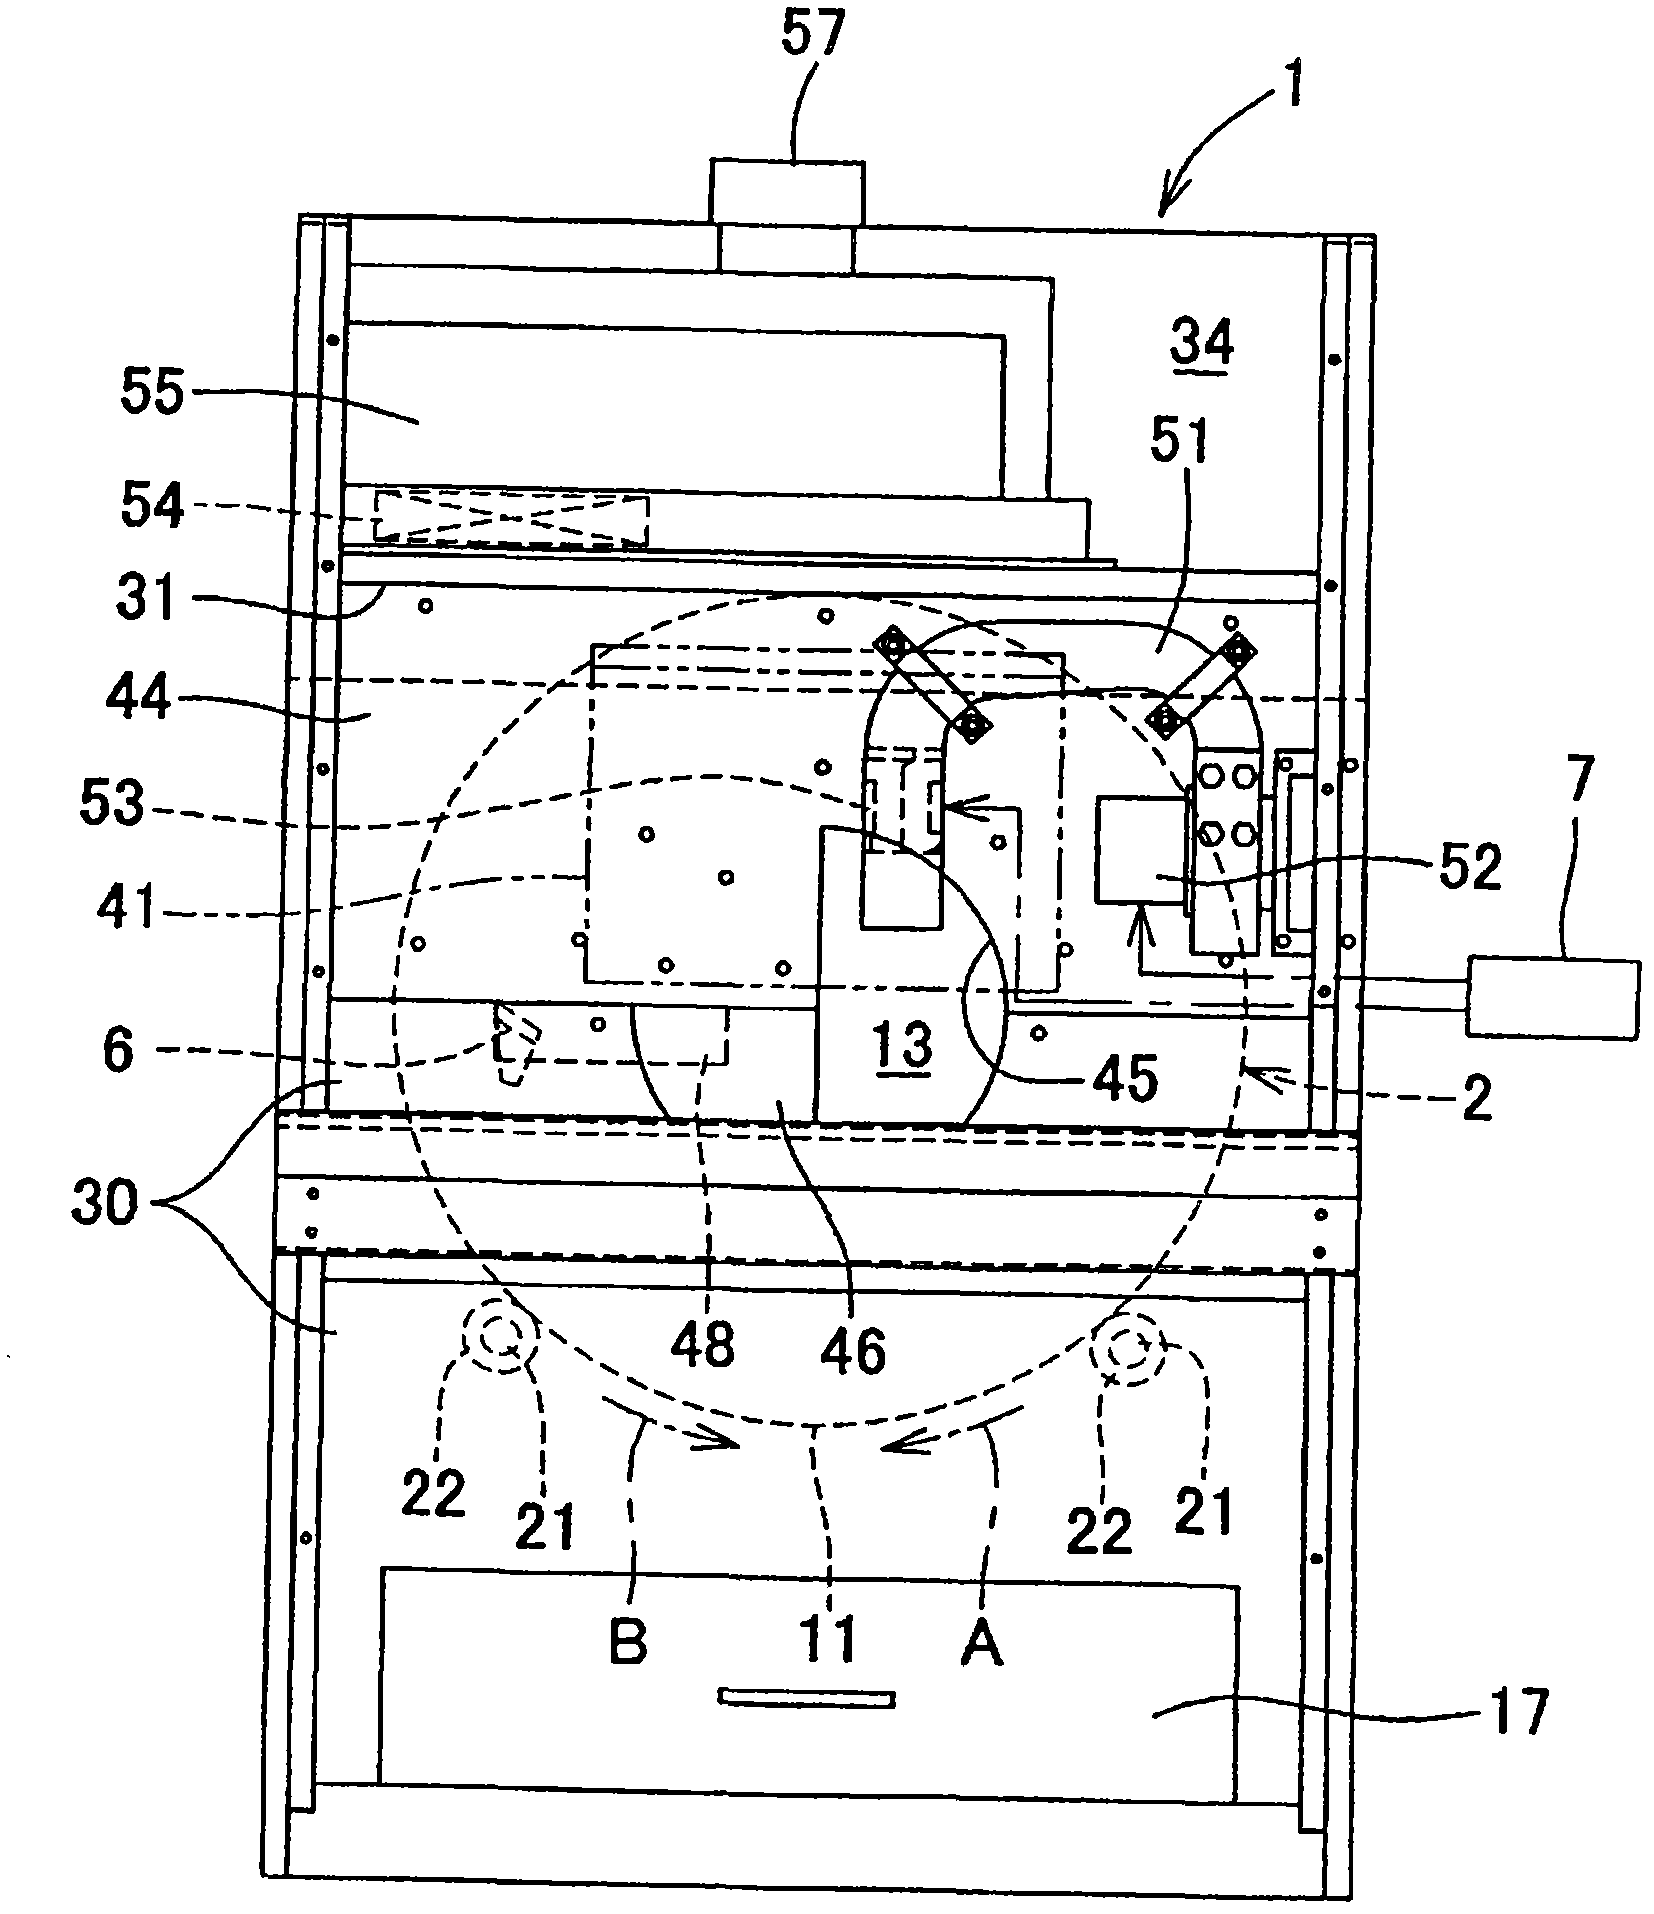 Domestic waste processing device